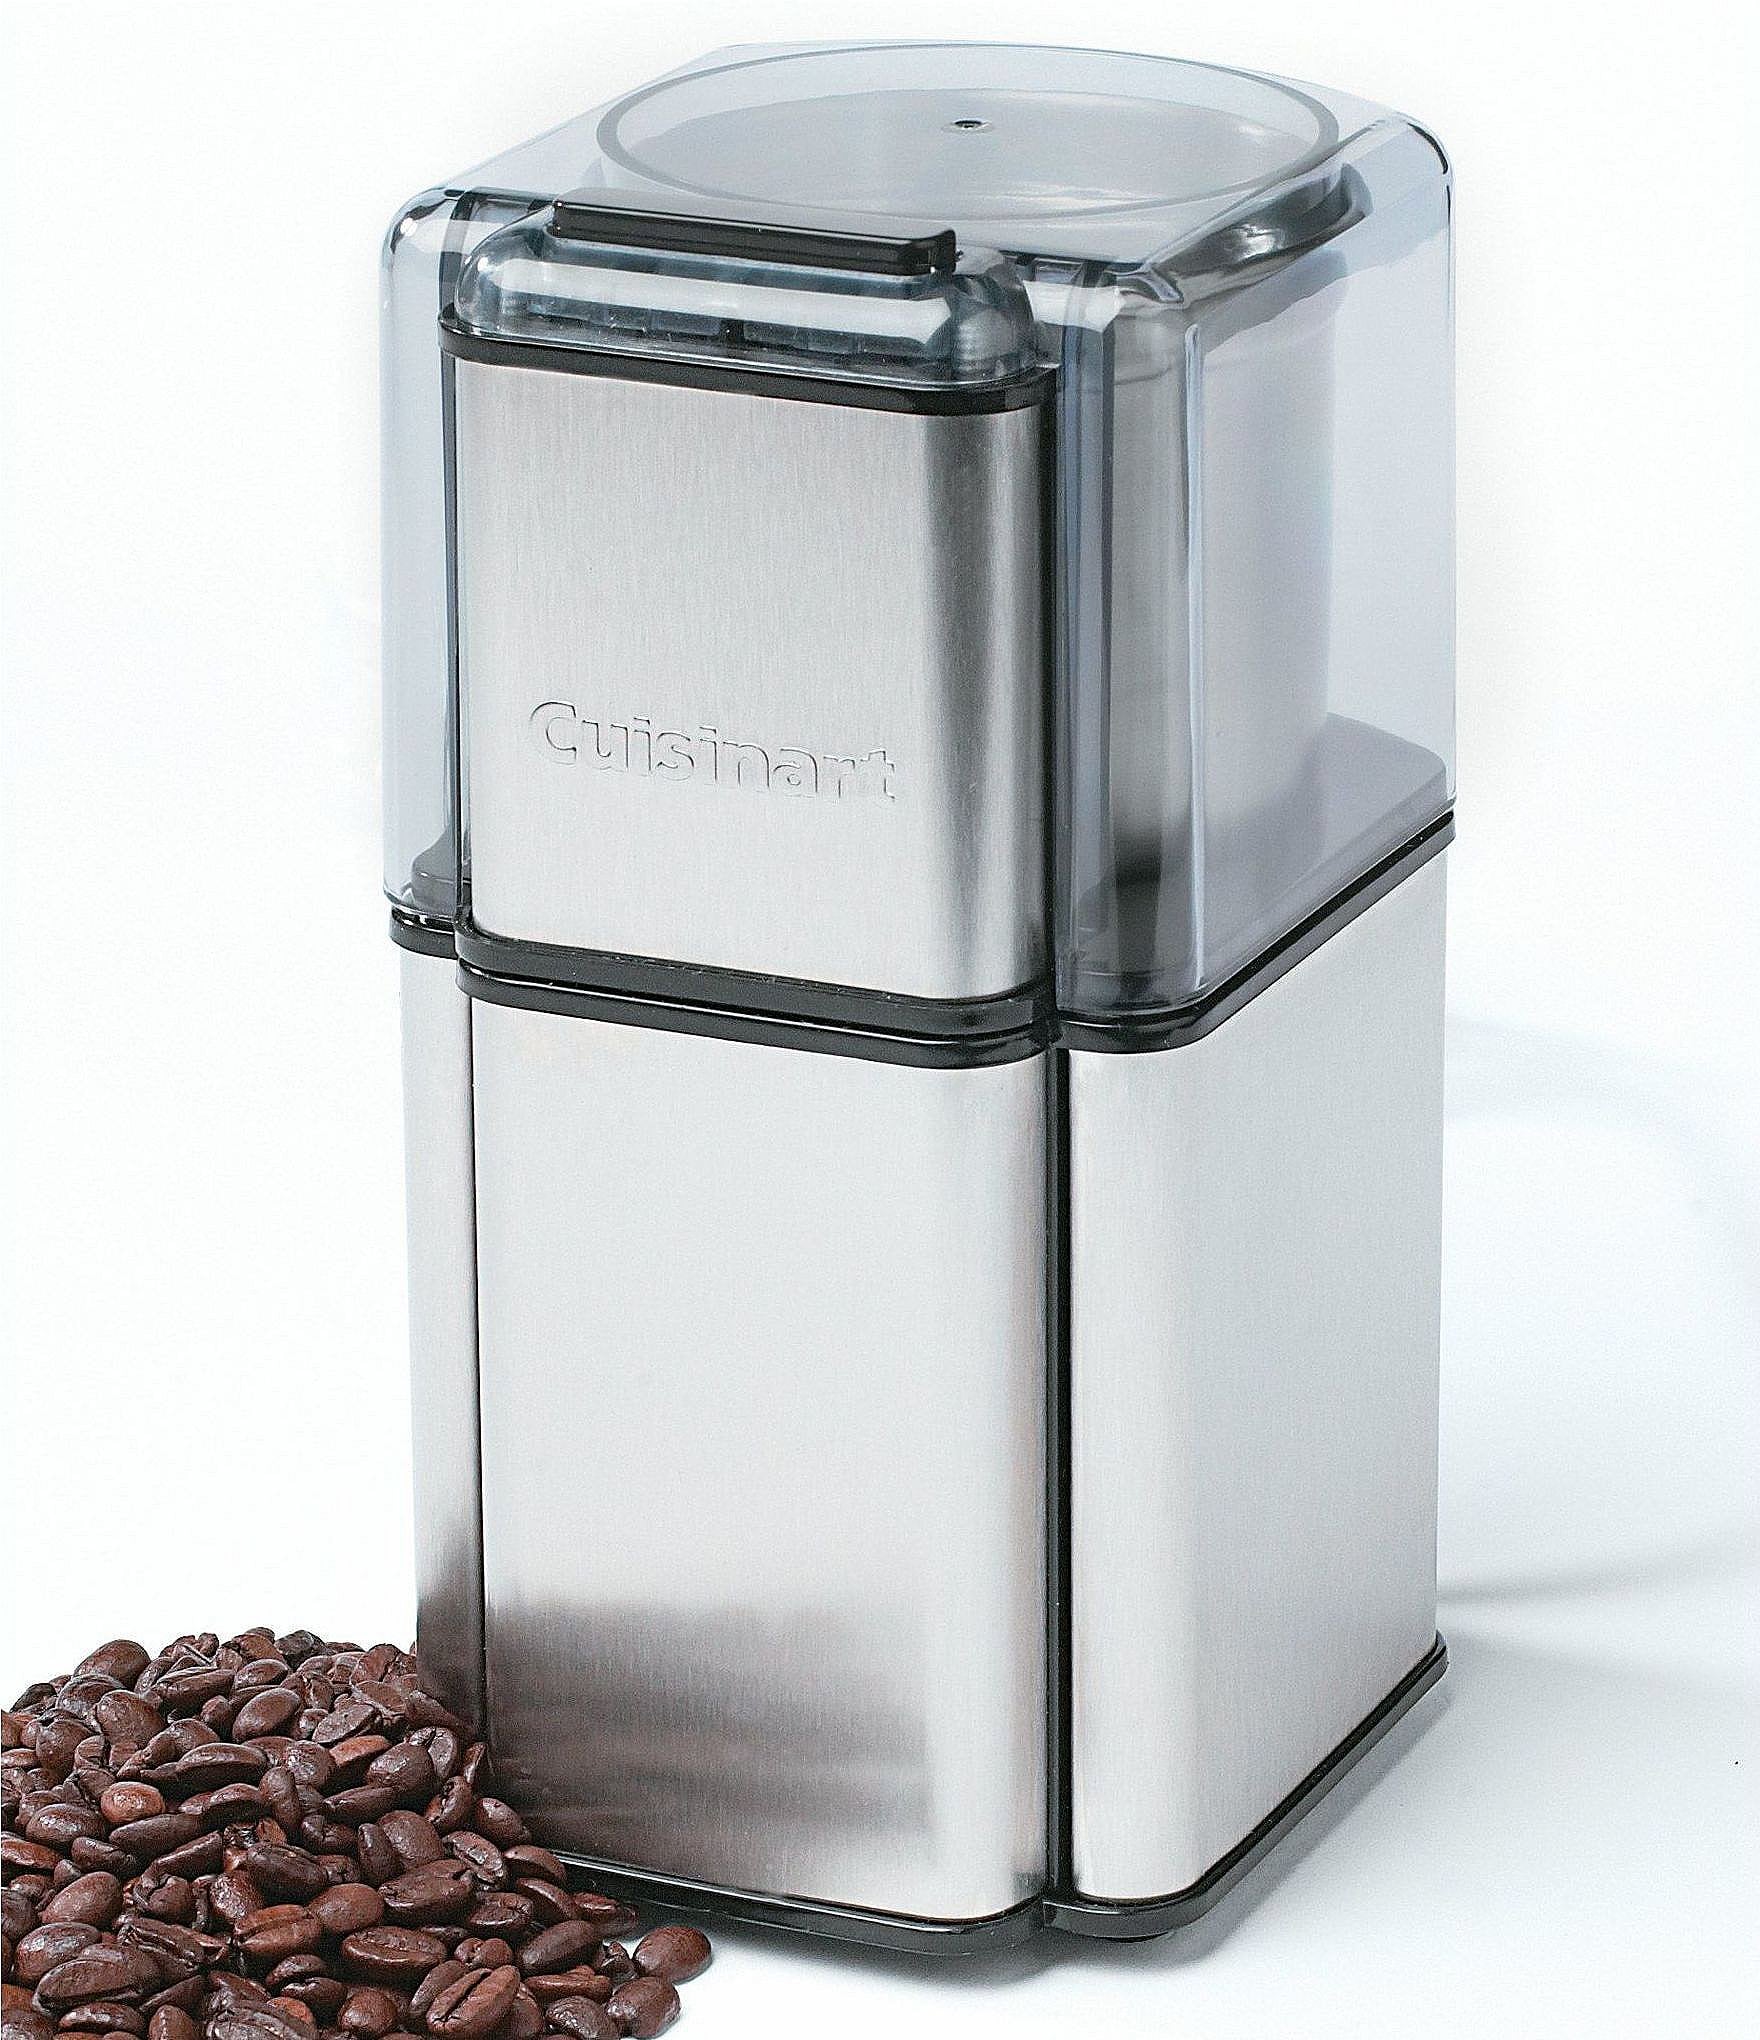 Cuisinart Coffee / Spice / Herb Grinder - household items - by owner -  housewares sale - craigslist